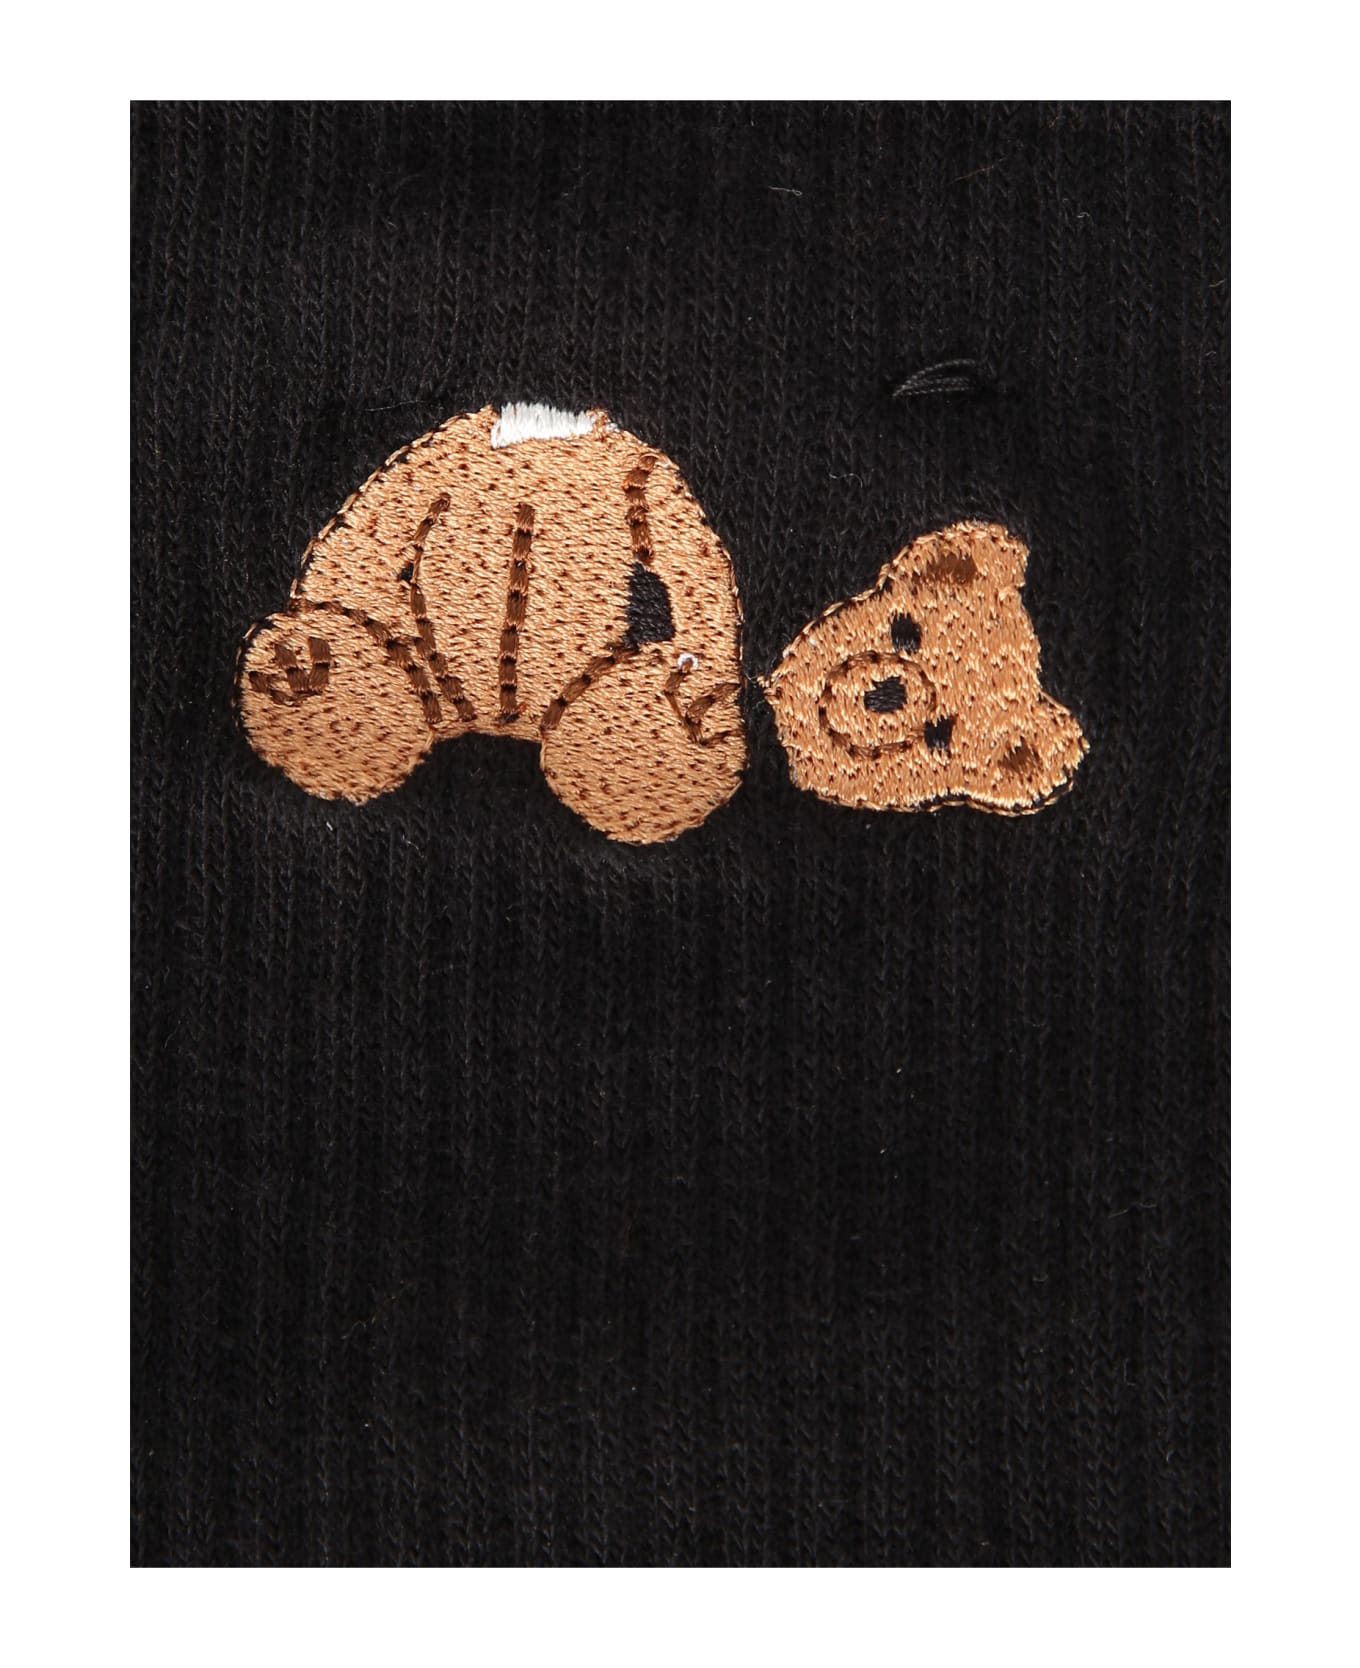 Palm Angels Embroidered Socks - Nero